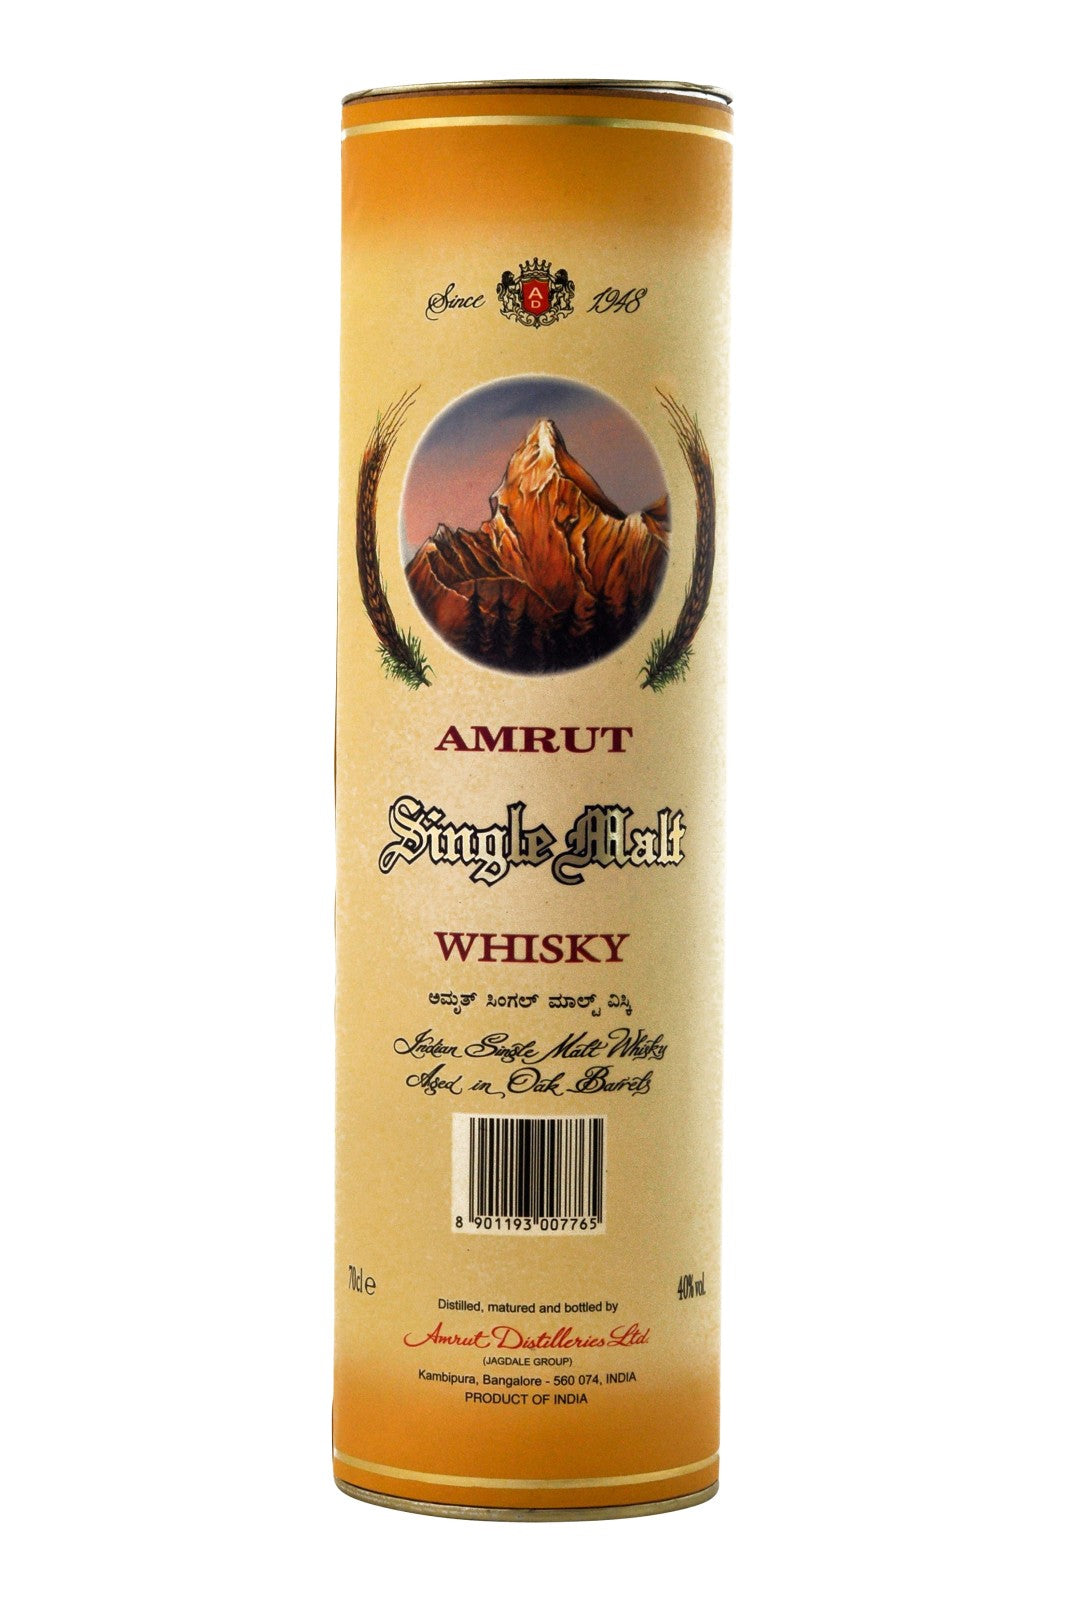 Amrut First Export Edition